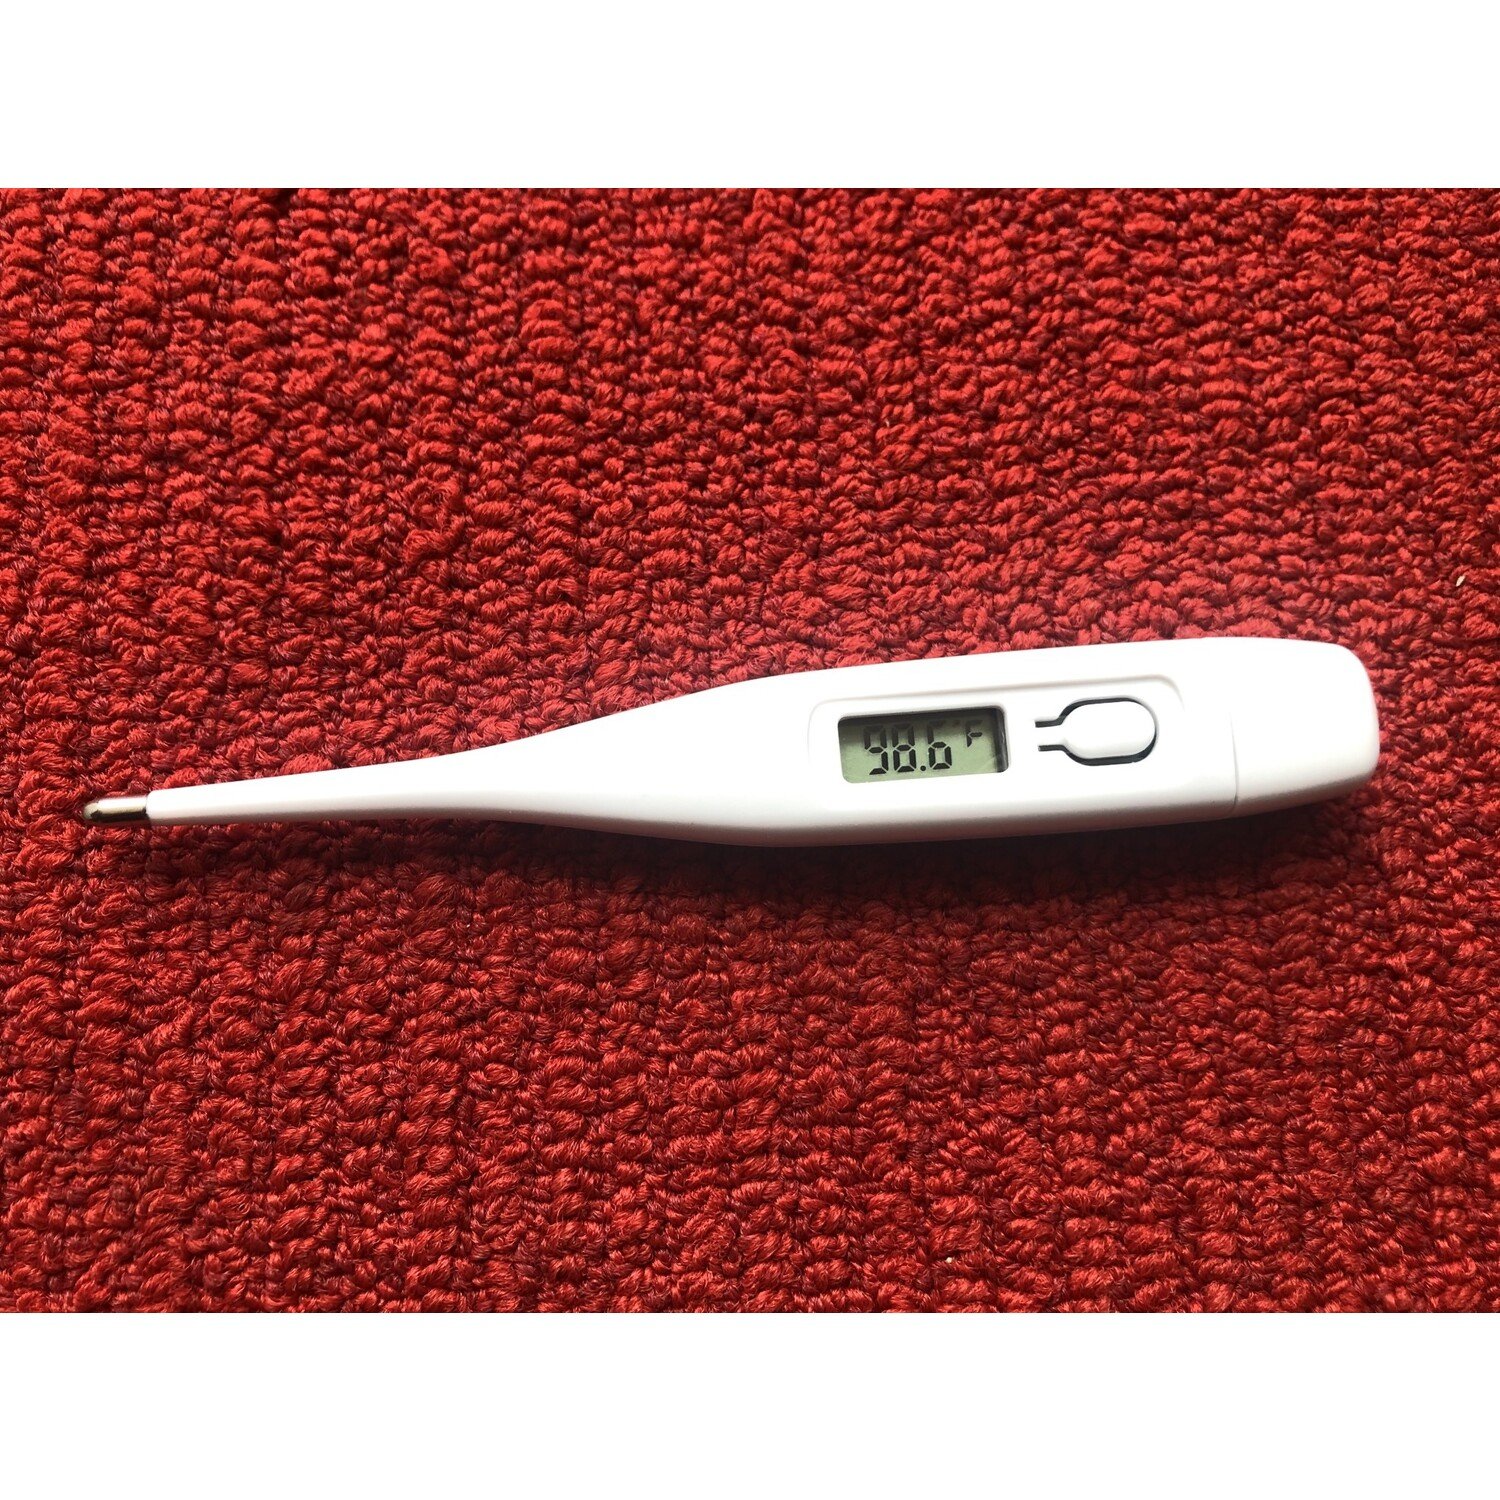 Digital Fast-Thermometer with Flexible Tip